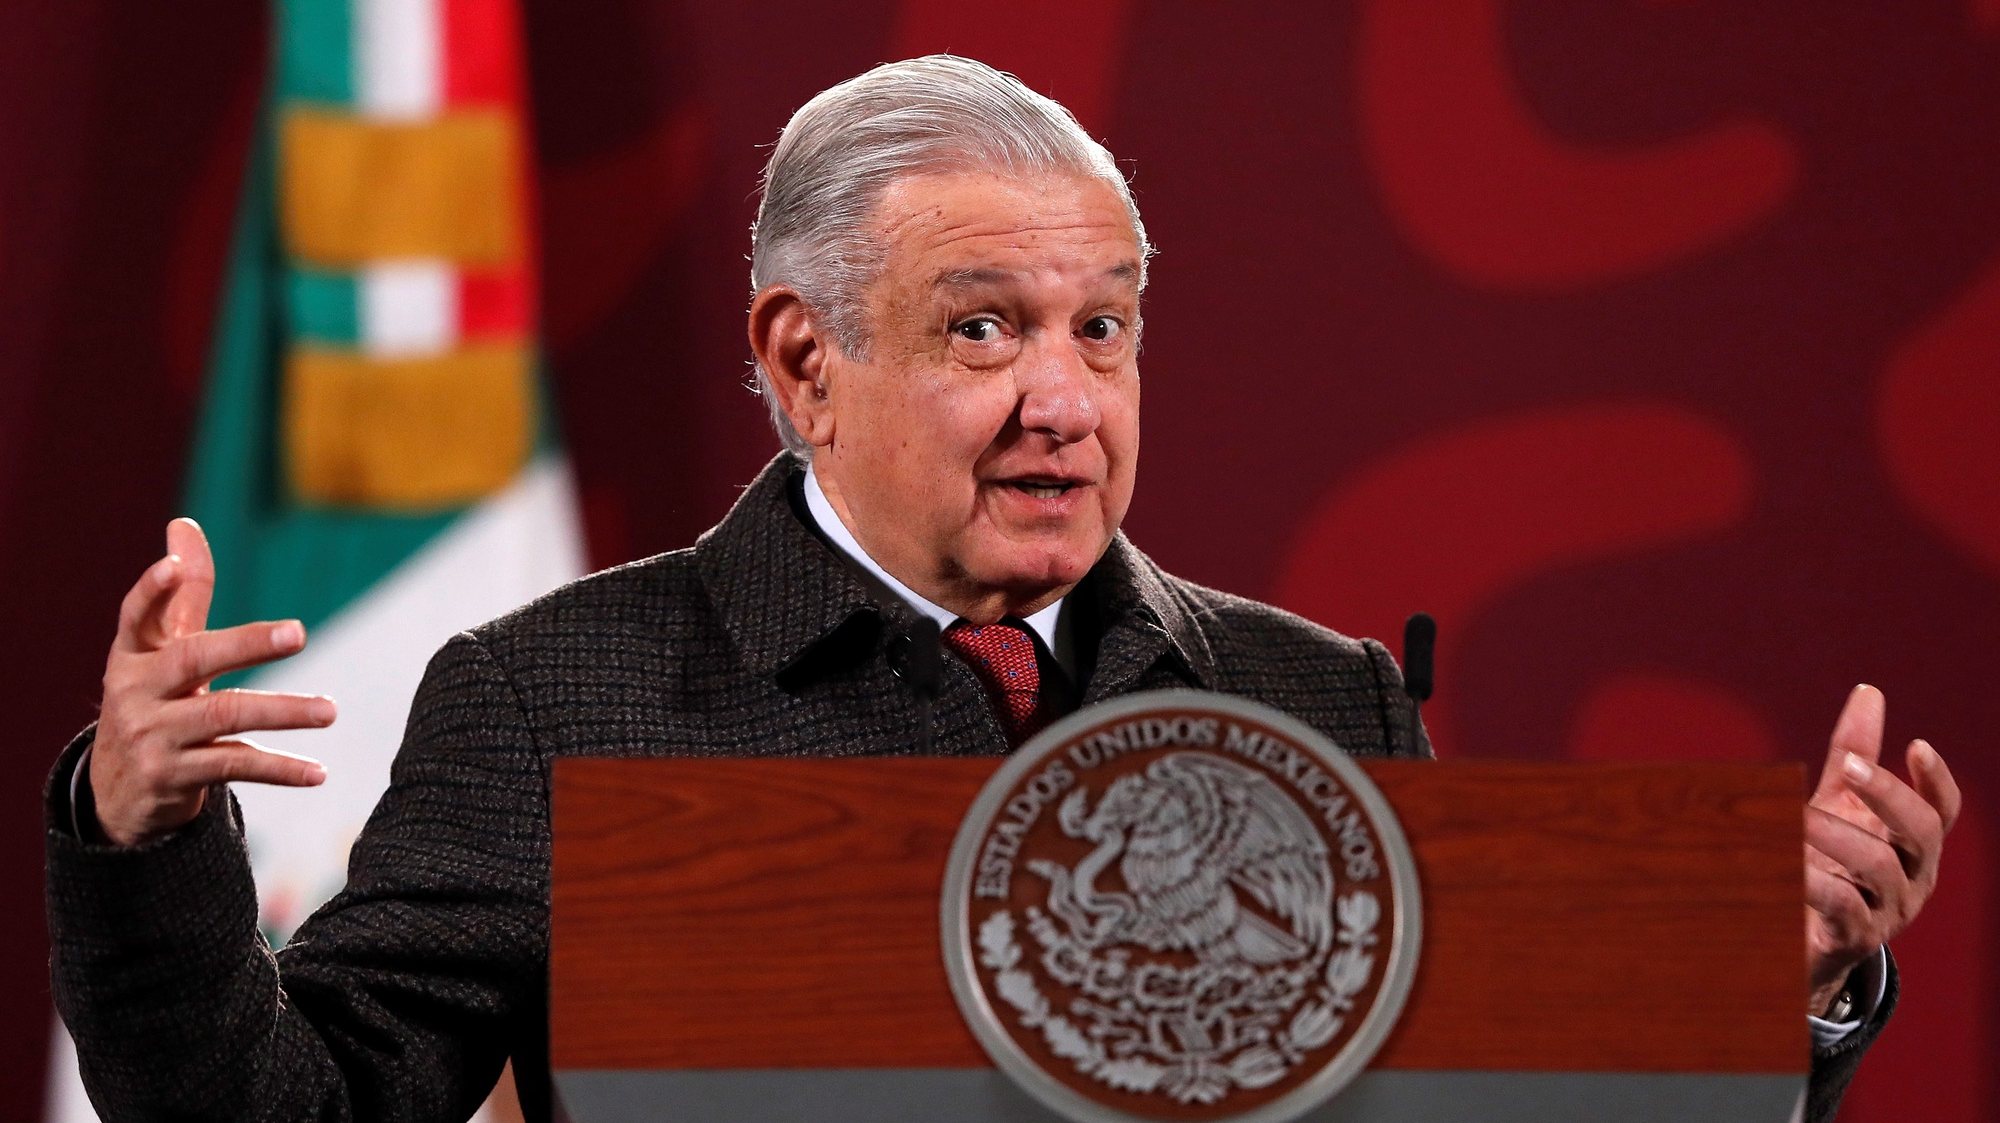 epa09721505 The President of Mexico, Andres Manuel Lopez Obrador, participates in a morning press conference at the National Palace in Mexico City, Mexico 01 February 2022. The Mexican president, Andres Manuel Lopez Obrador, defended the &#039;historic and free&#039; election of the new union leader of Petroleos Mexicanos (Pemex) despite the victory of Ricardo Aldana, linked to the old and obscure leader Carlos Romero Deschamps.  EPA/Mario Guzman